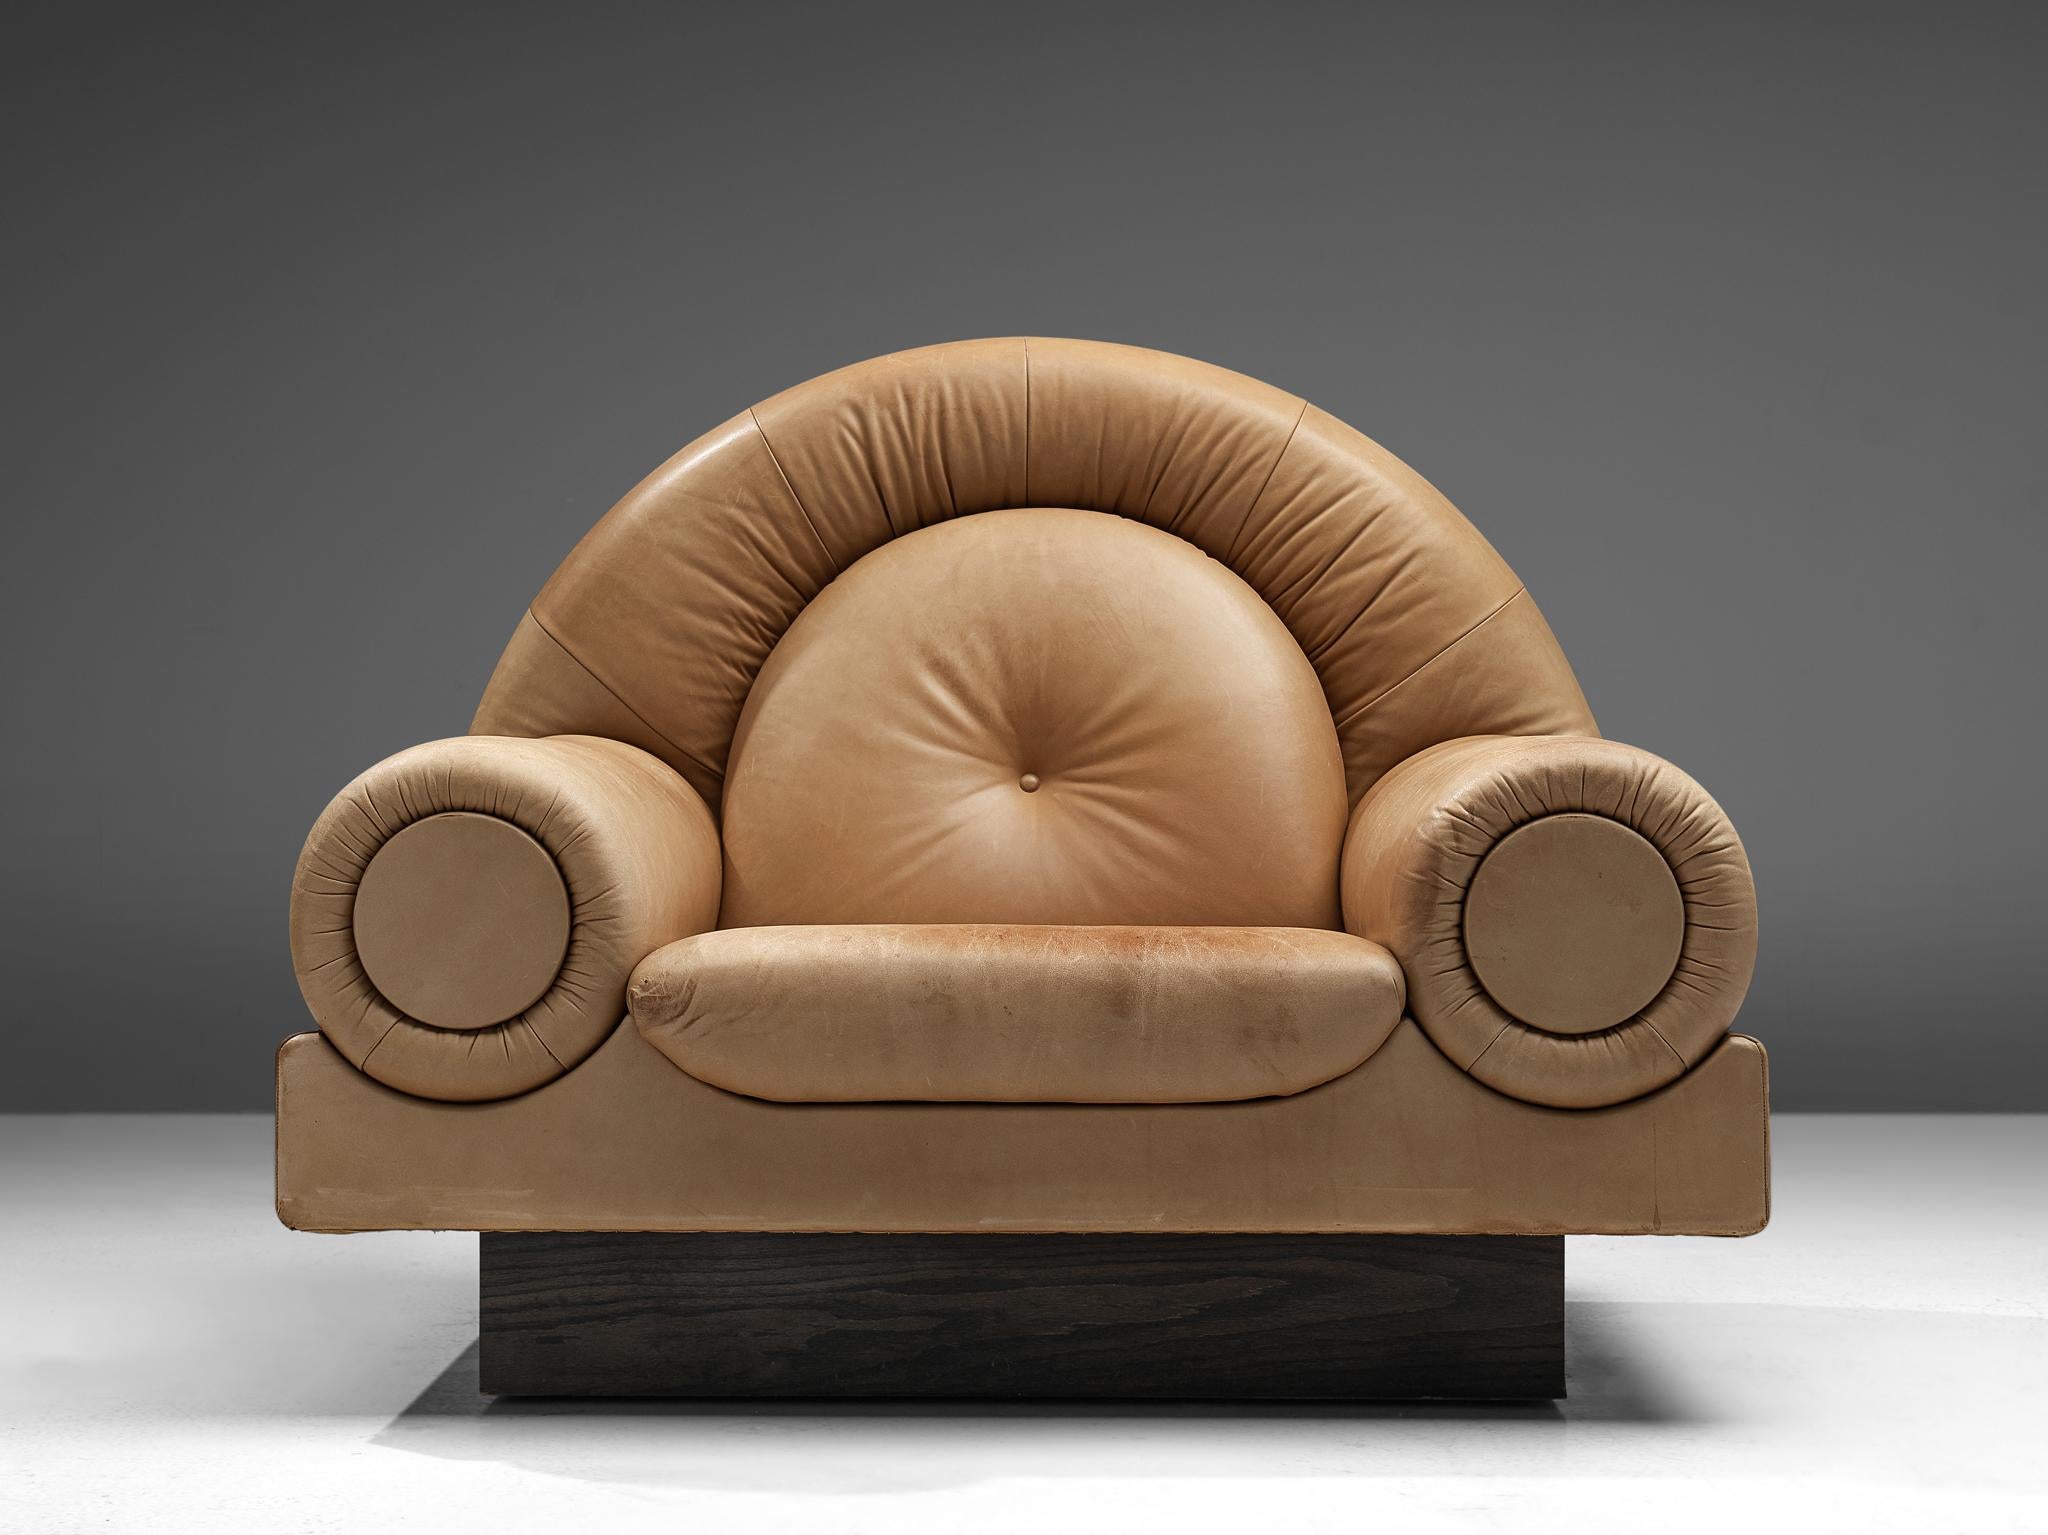 Easy chair, wood and leather, Europe, 1970s. 

Sculptural lounge chair in light brown leather. The strong round forms make a beautiful and striking chair.

